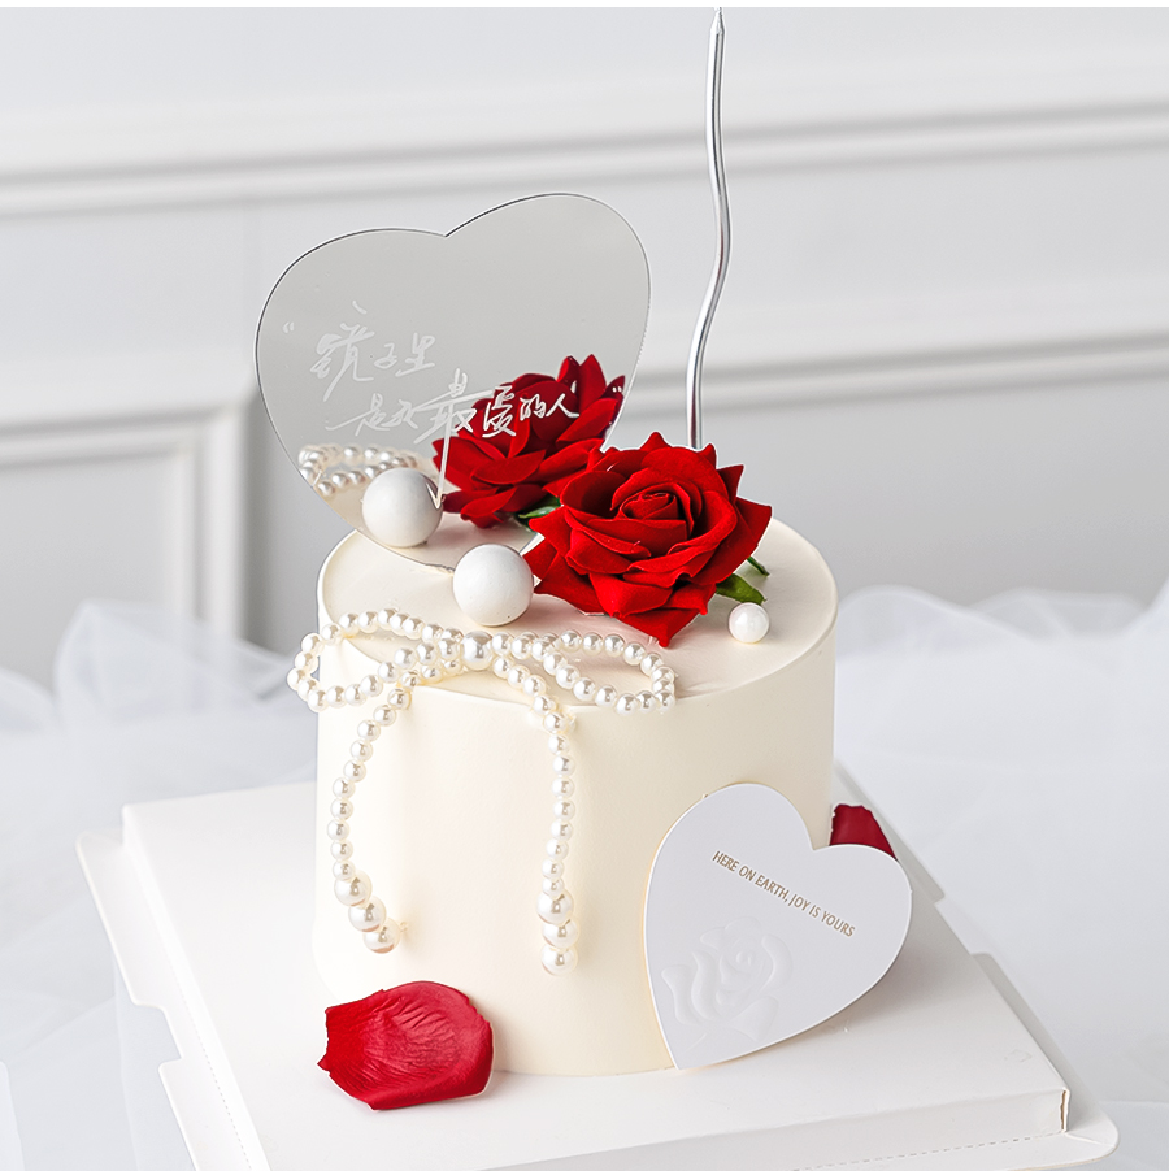 Cake Topper - Pearl Bow